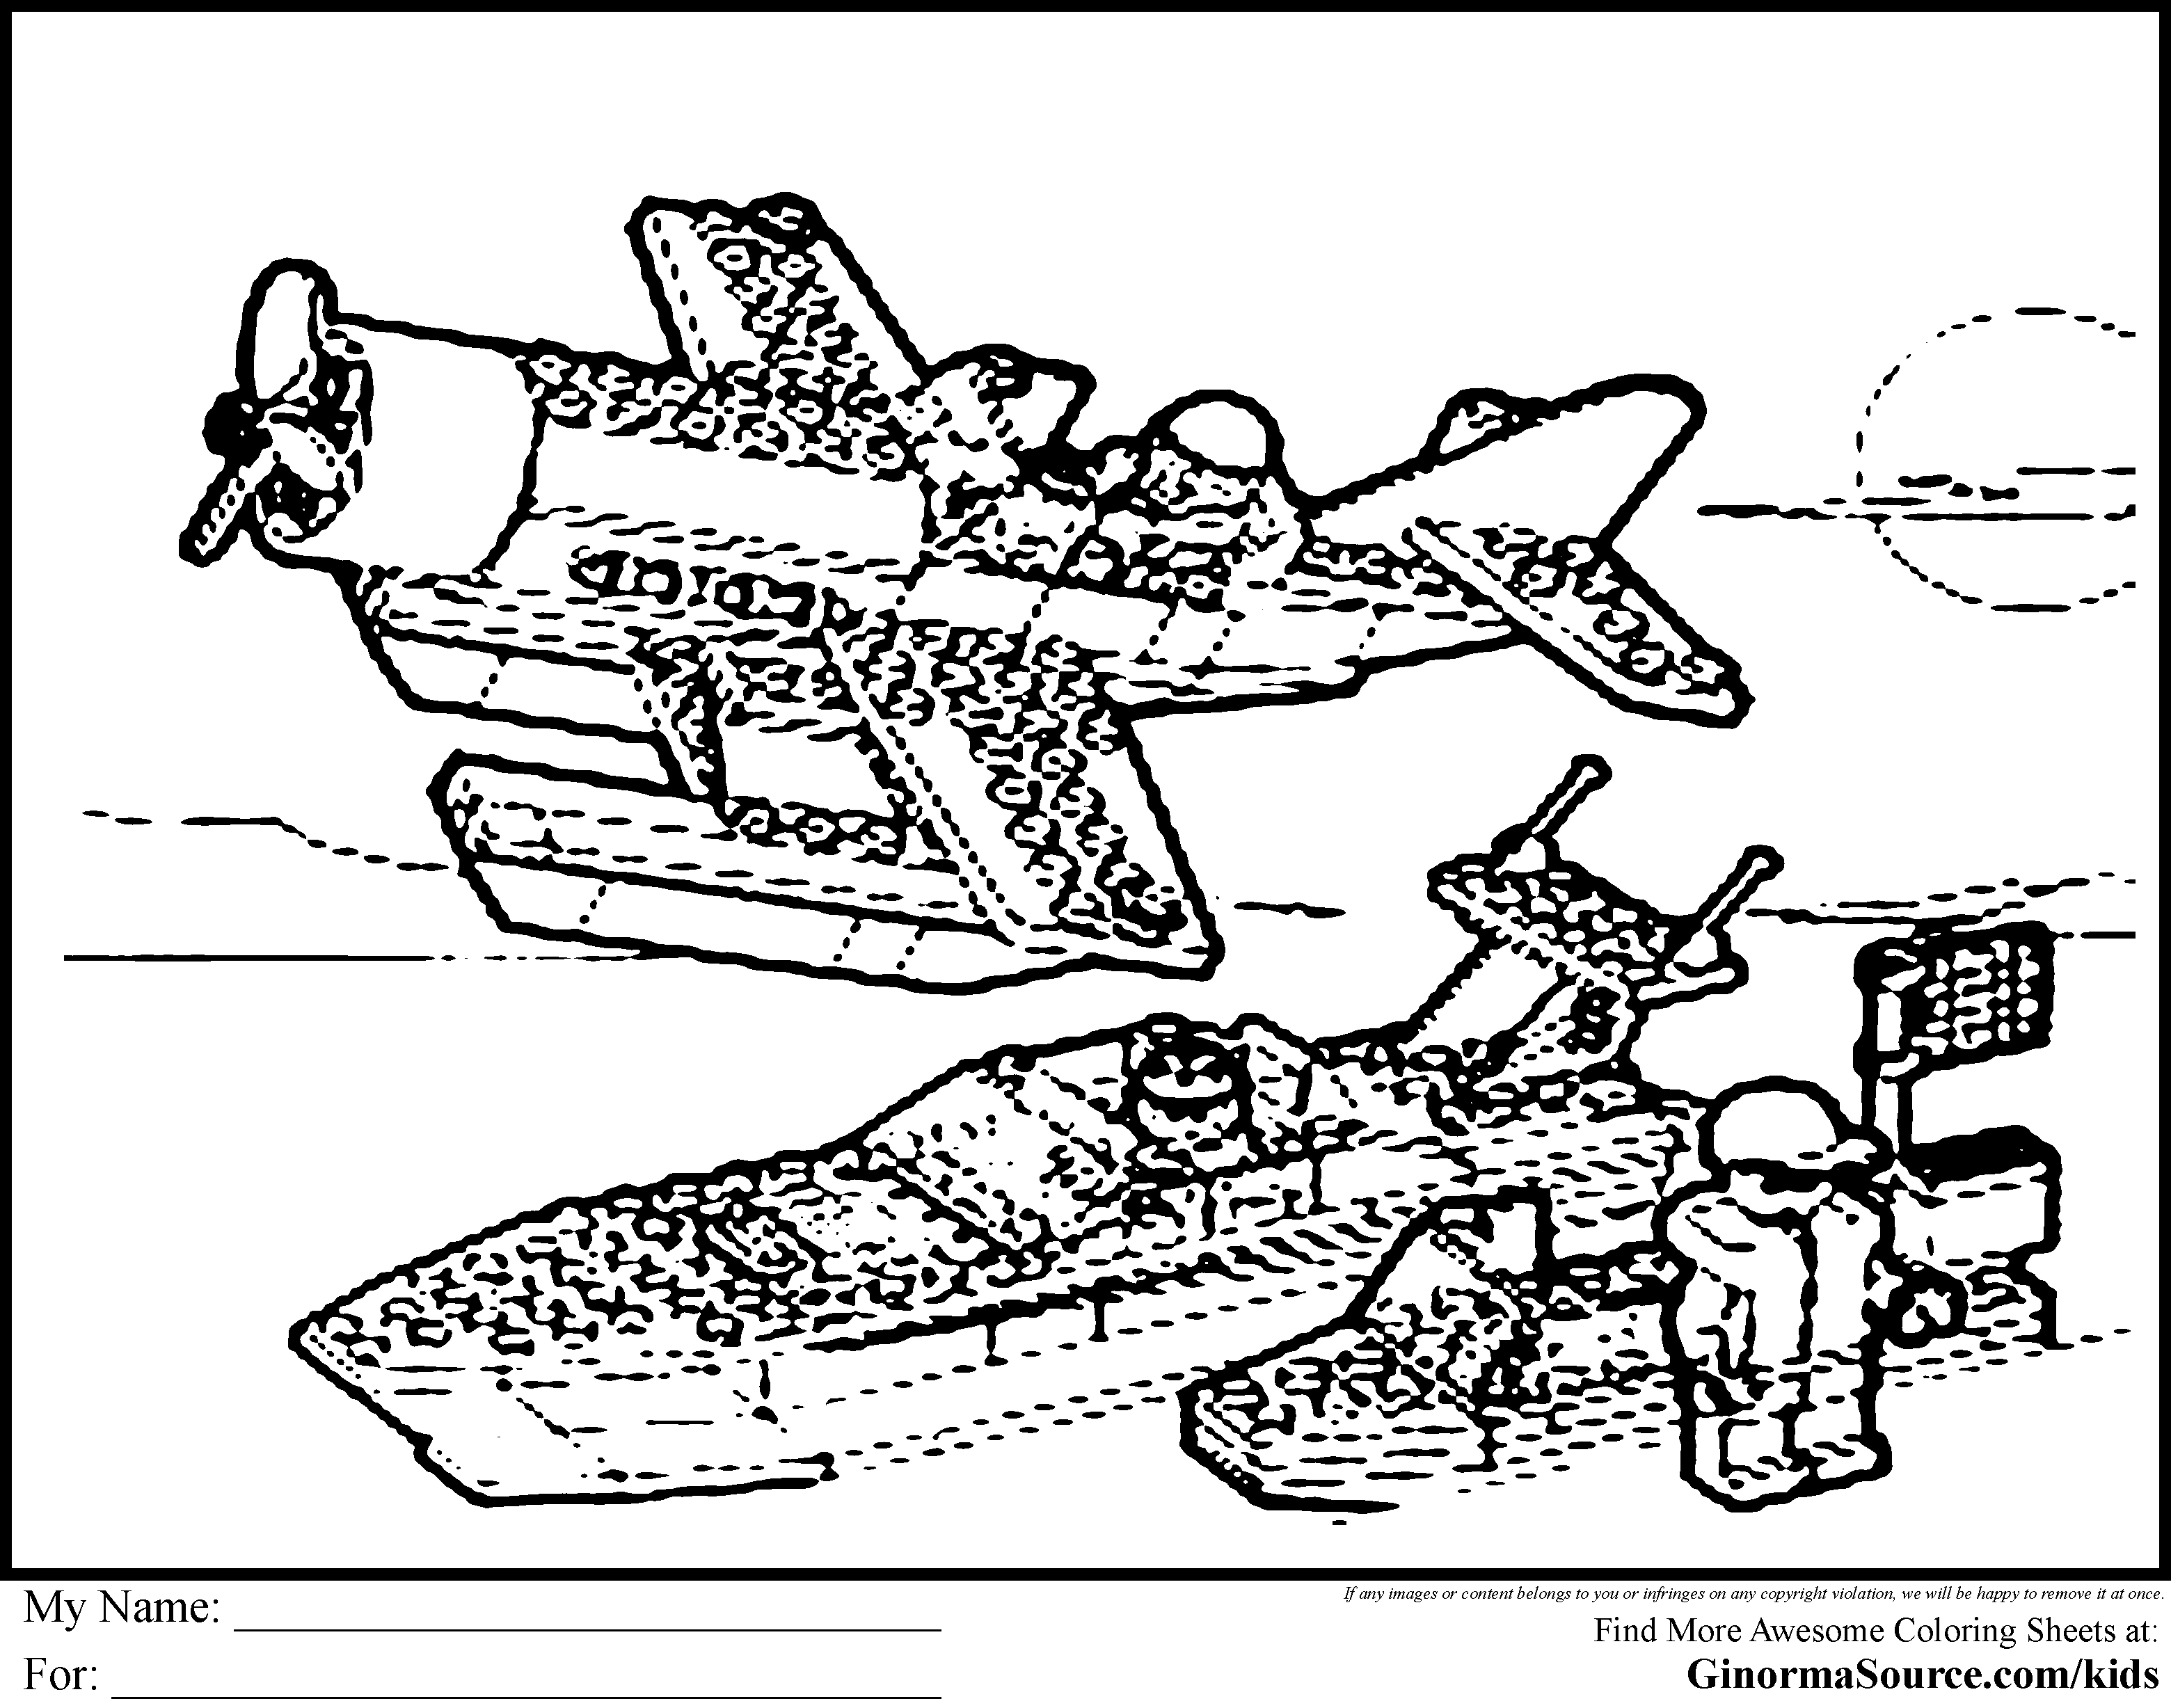 Lego Airplane Coloring Sheet - Aeroplanes Coloring Pages - Coloring